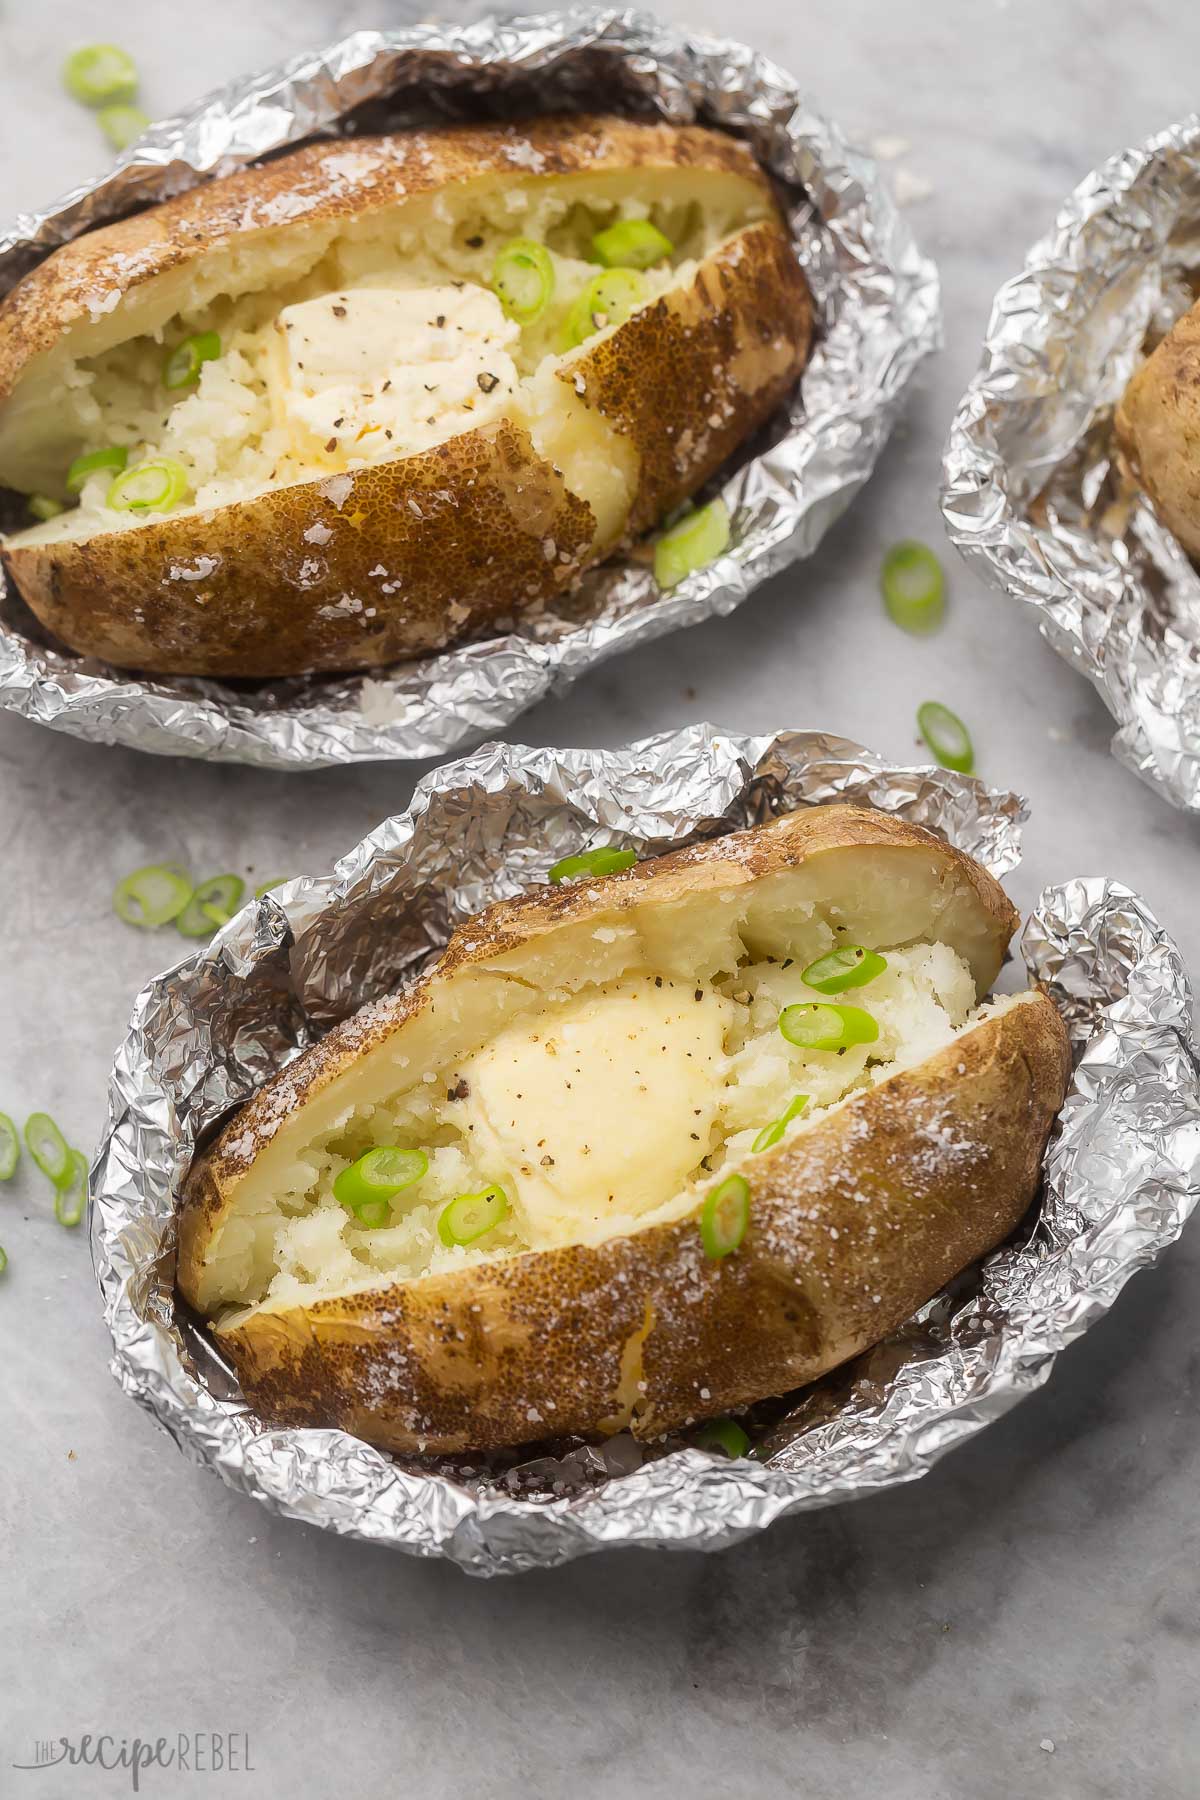 Top view of two baked potatoes unwrapped from foil packets, with butter melting inside them, and some chopped green onions on top. 